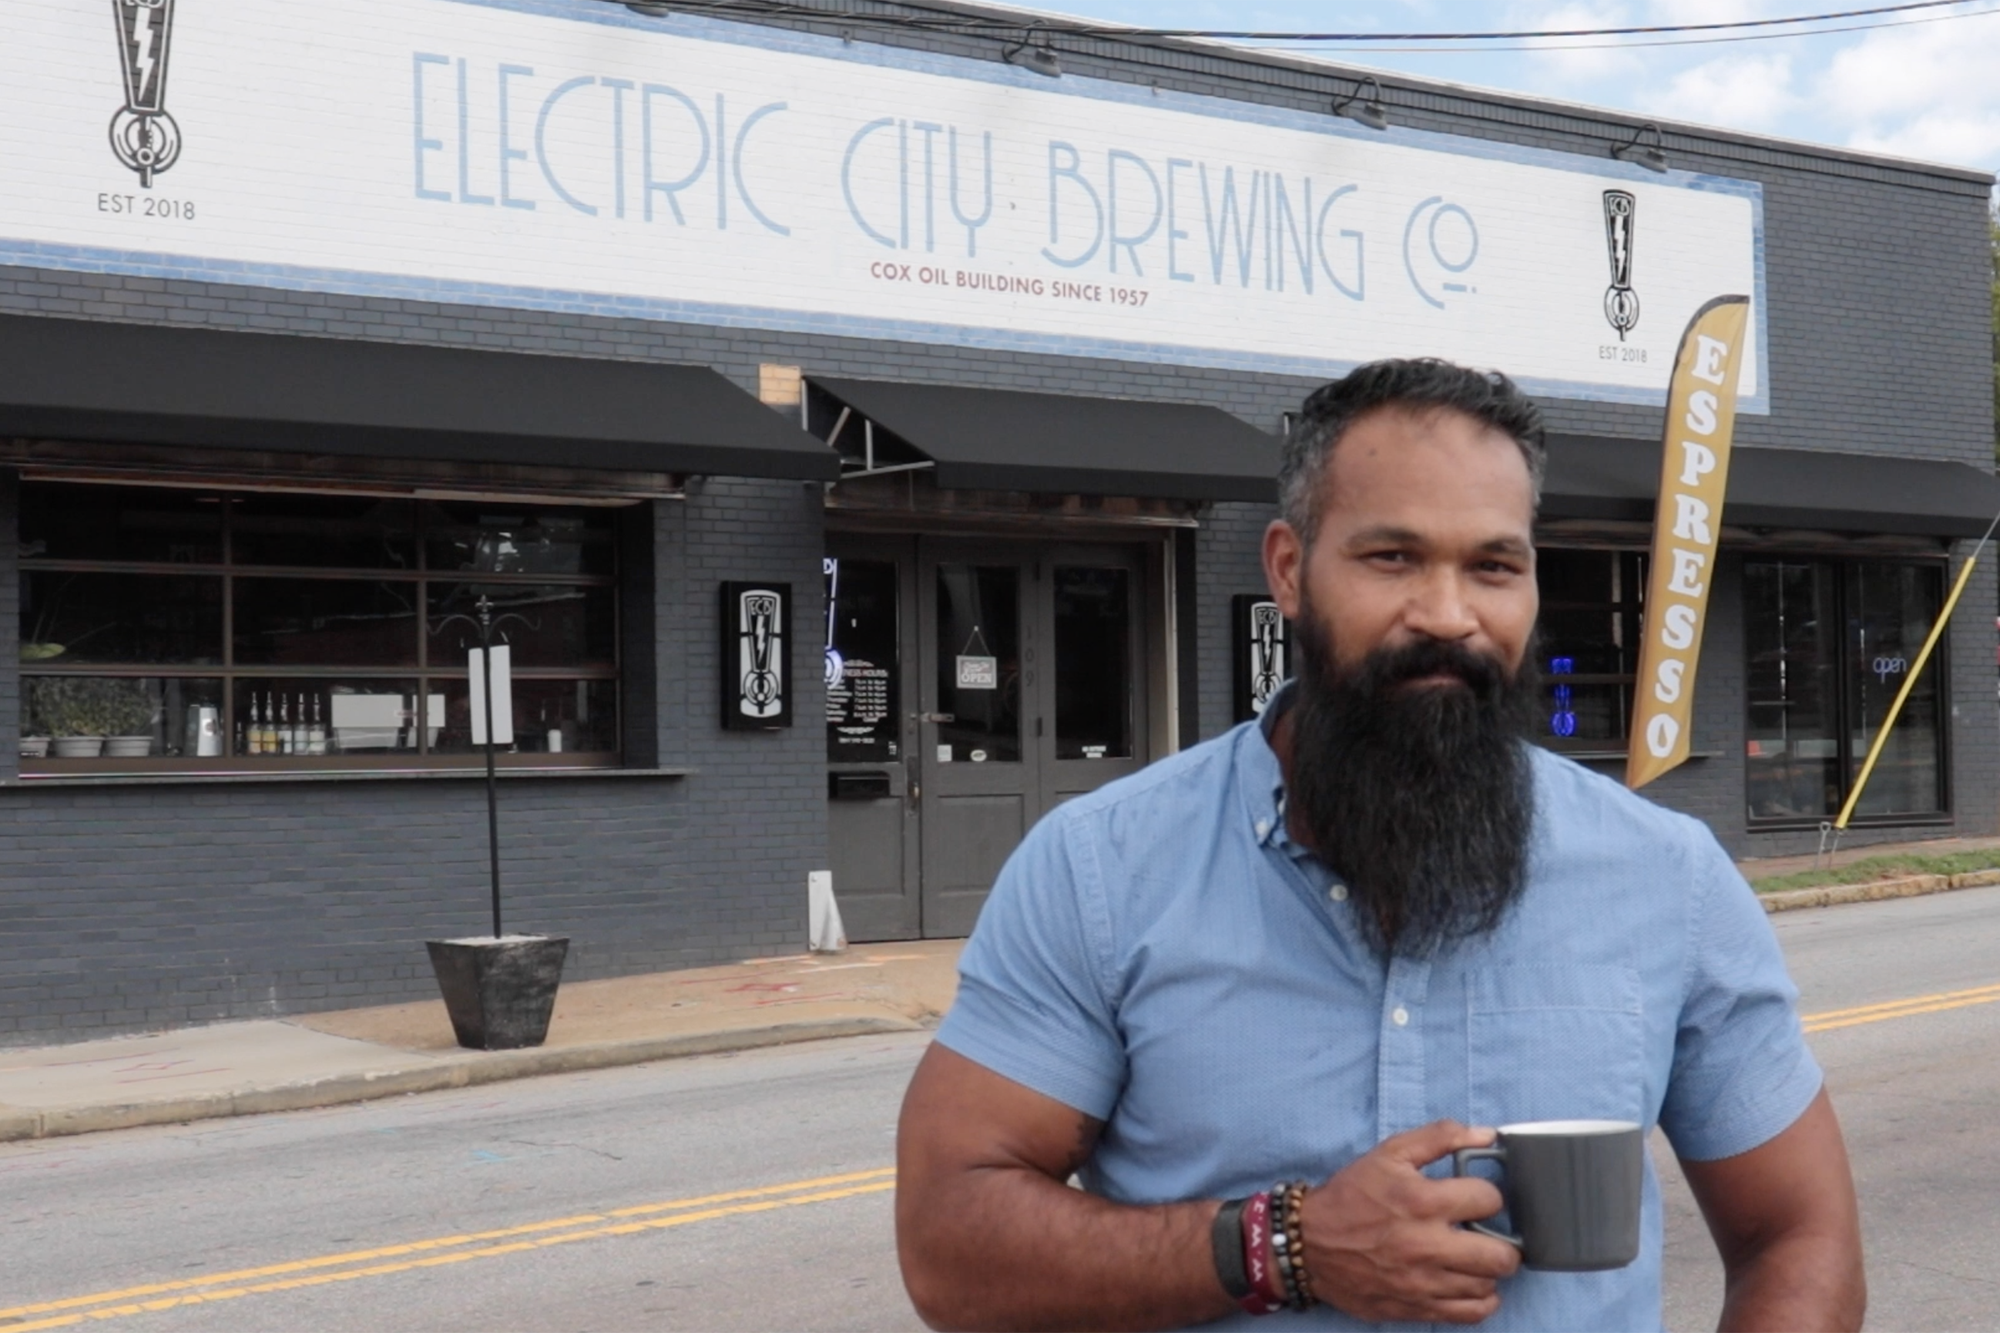 Electric City Brewing